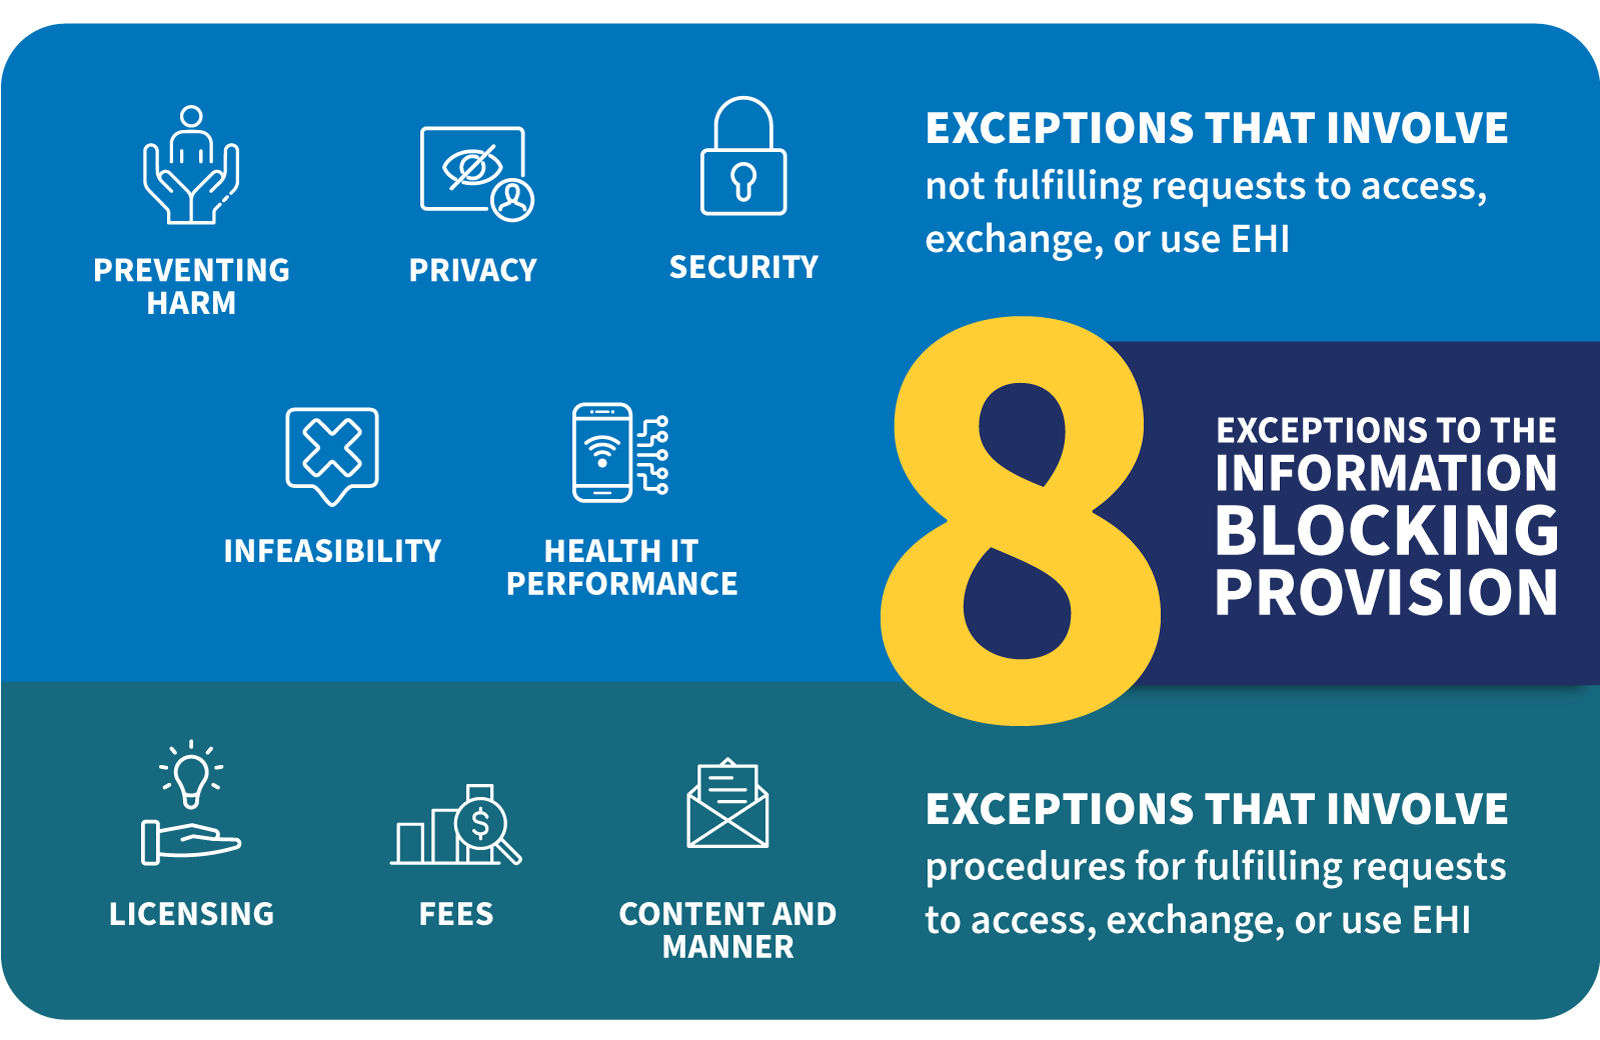 8 Exceptions to the information blocking provision